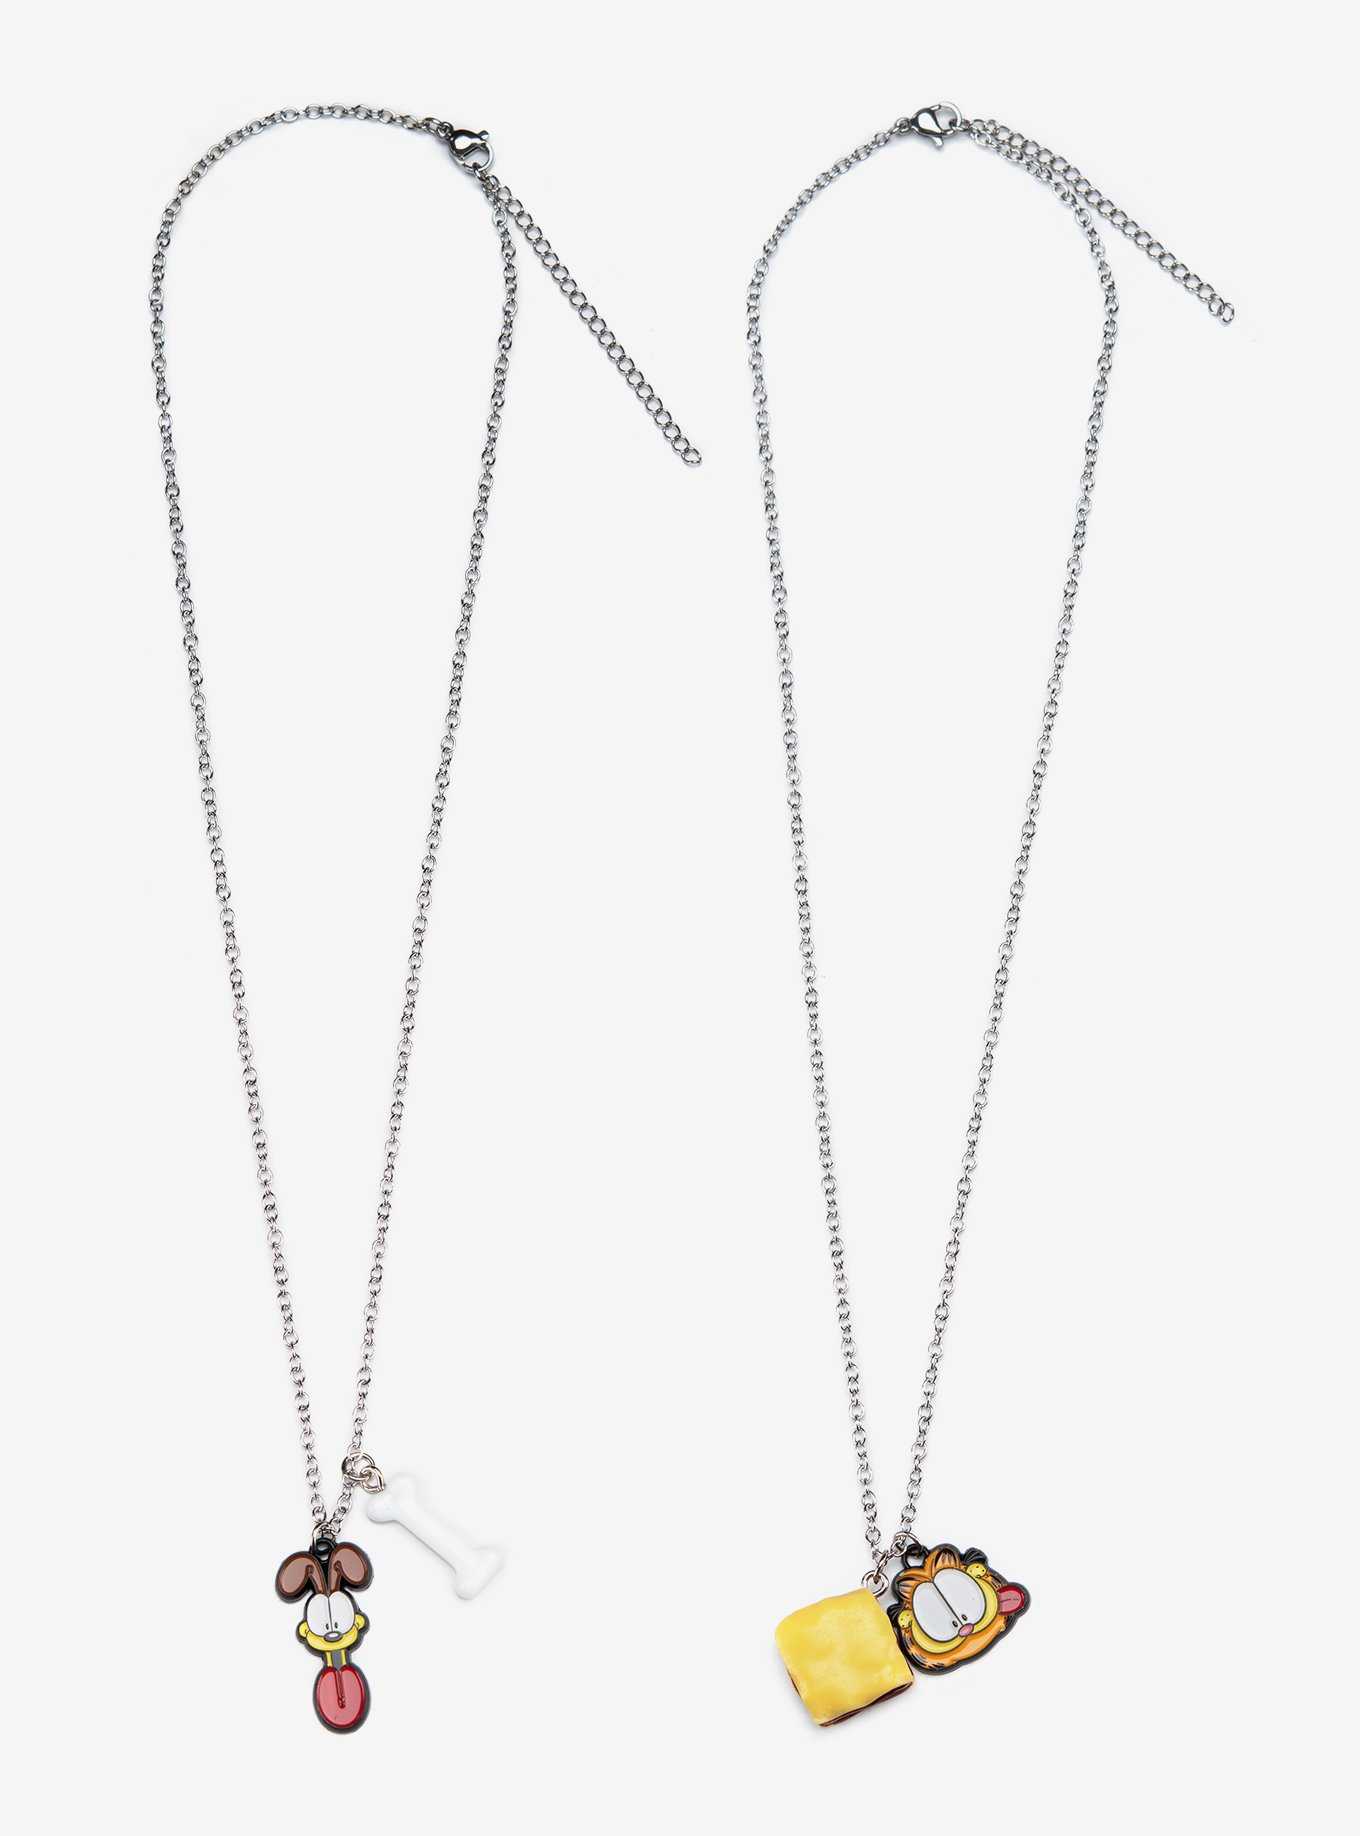 Garfield and Odie BFF Charm Necklace Set, , hi-res